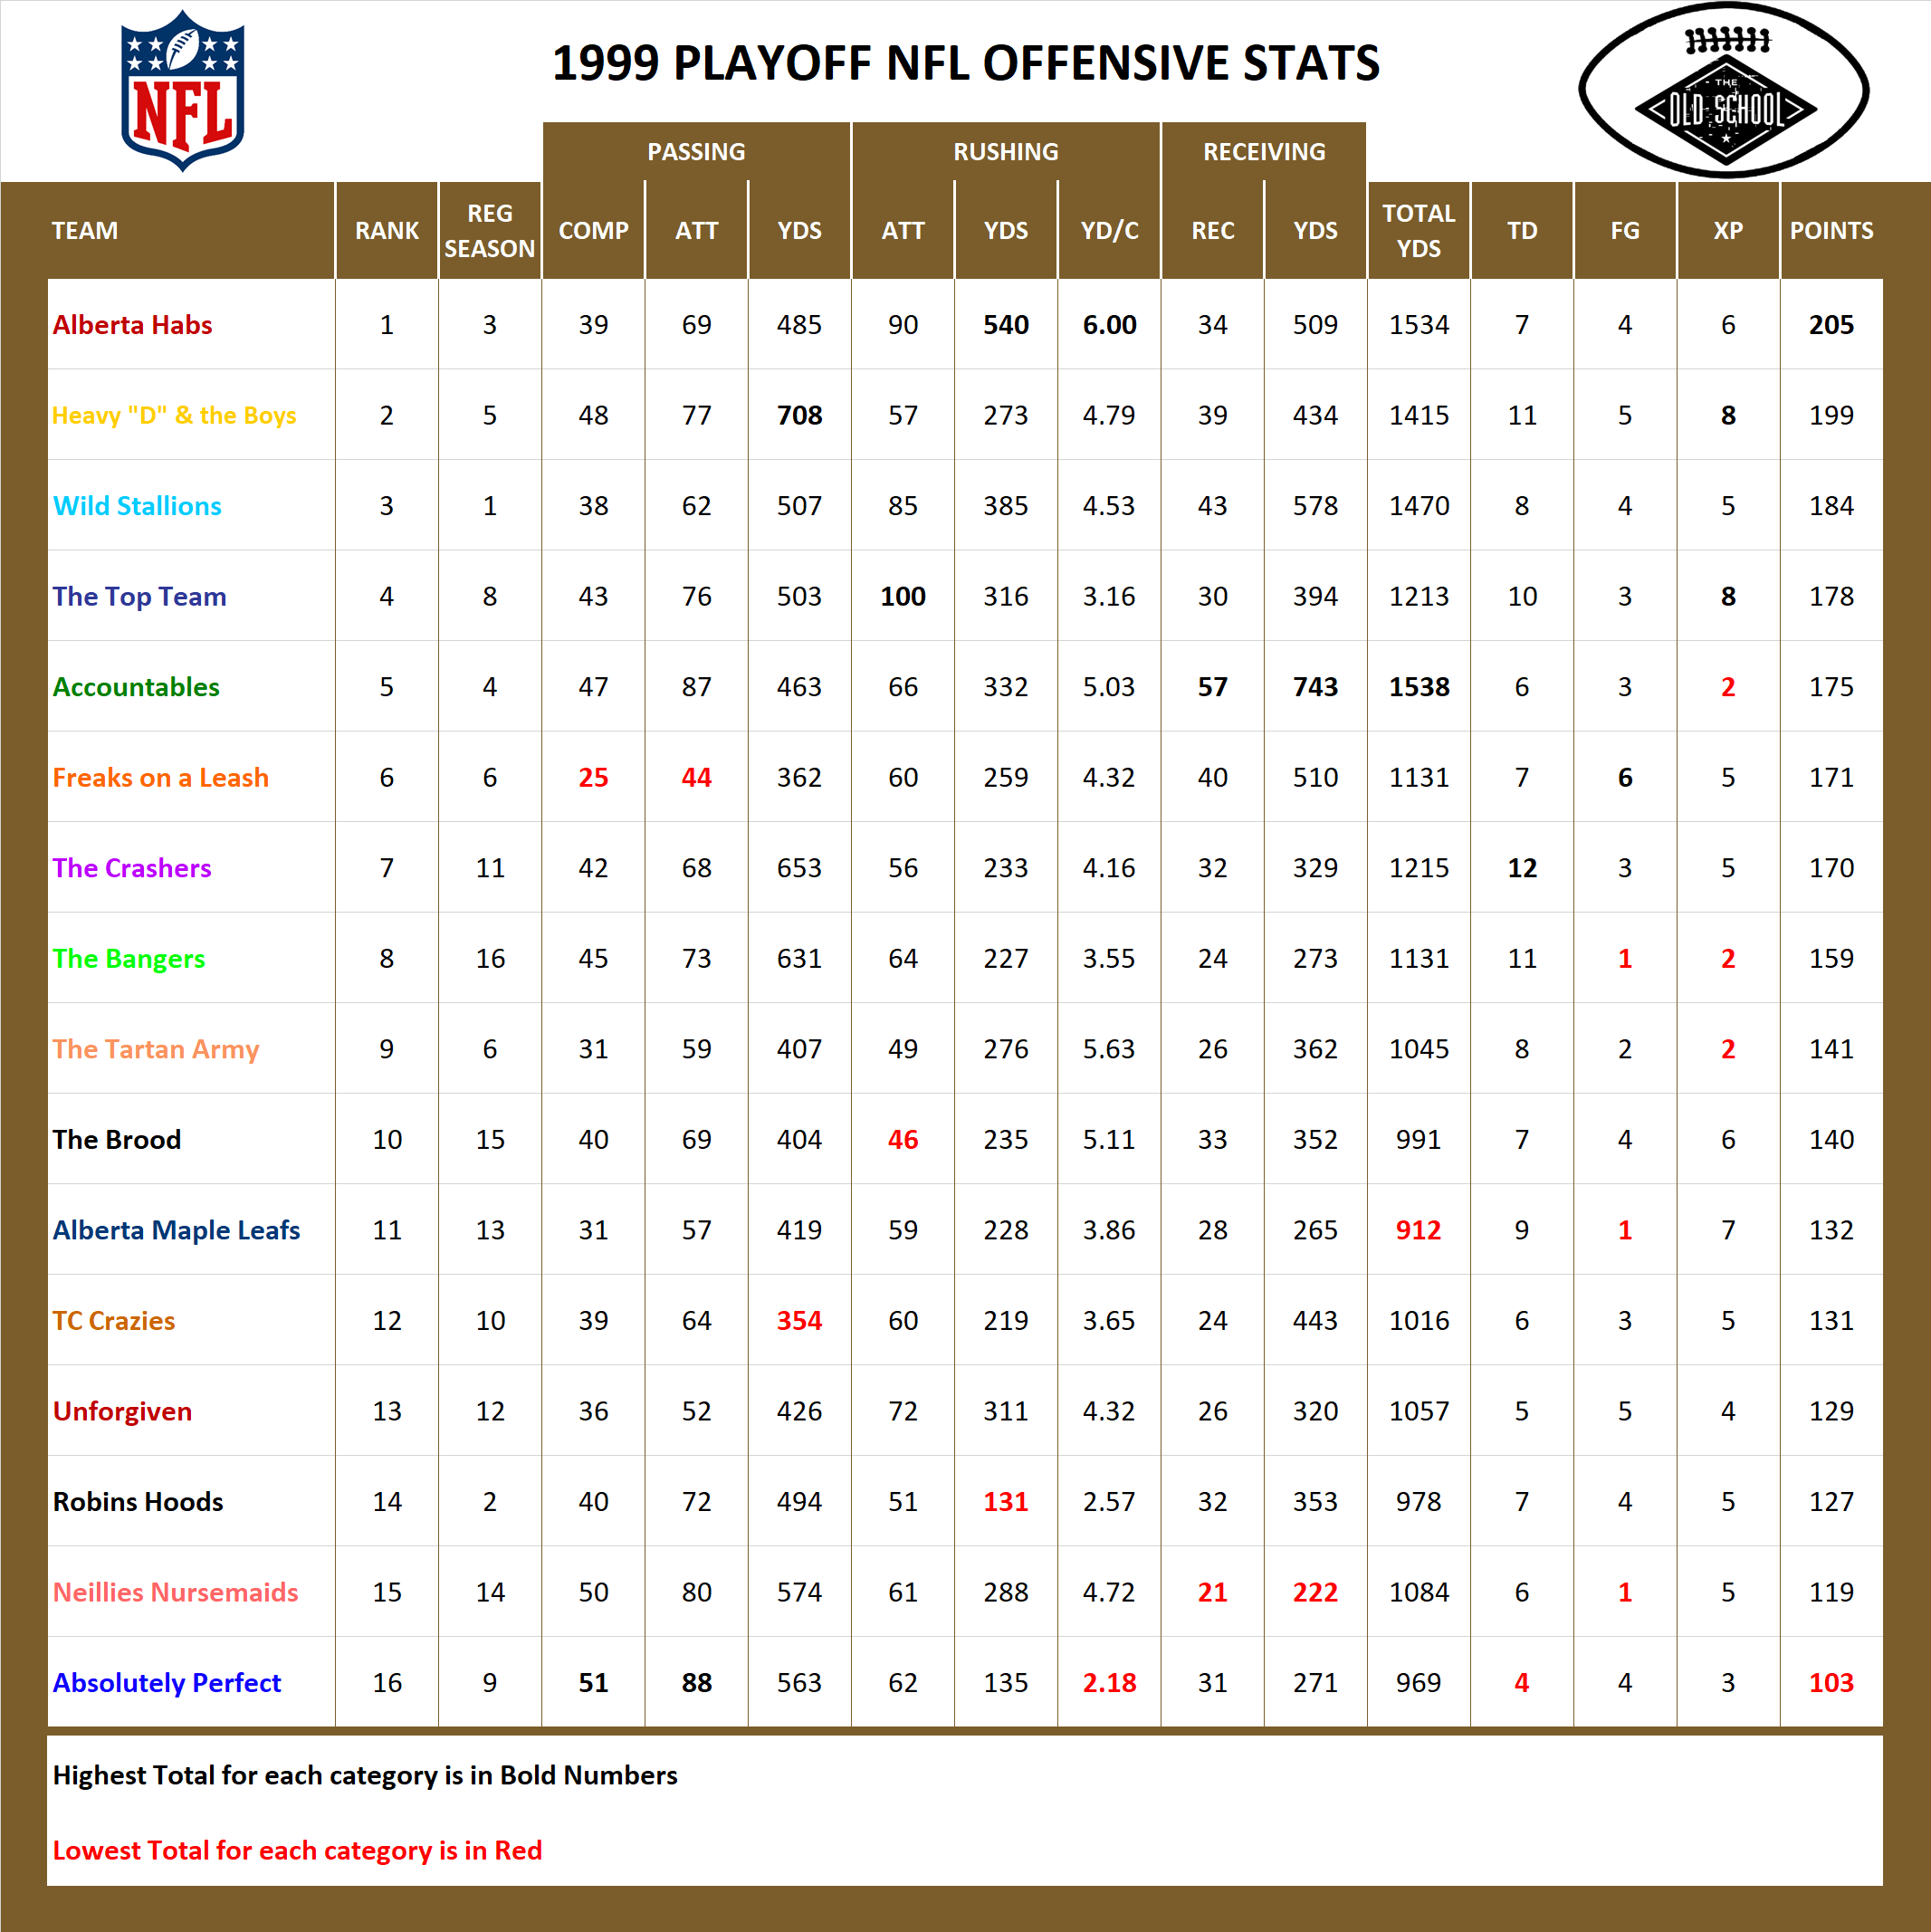 1999 National Football League Pool Playoff Offensive Stats